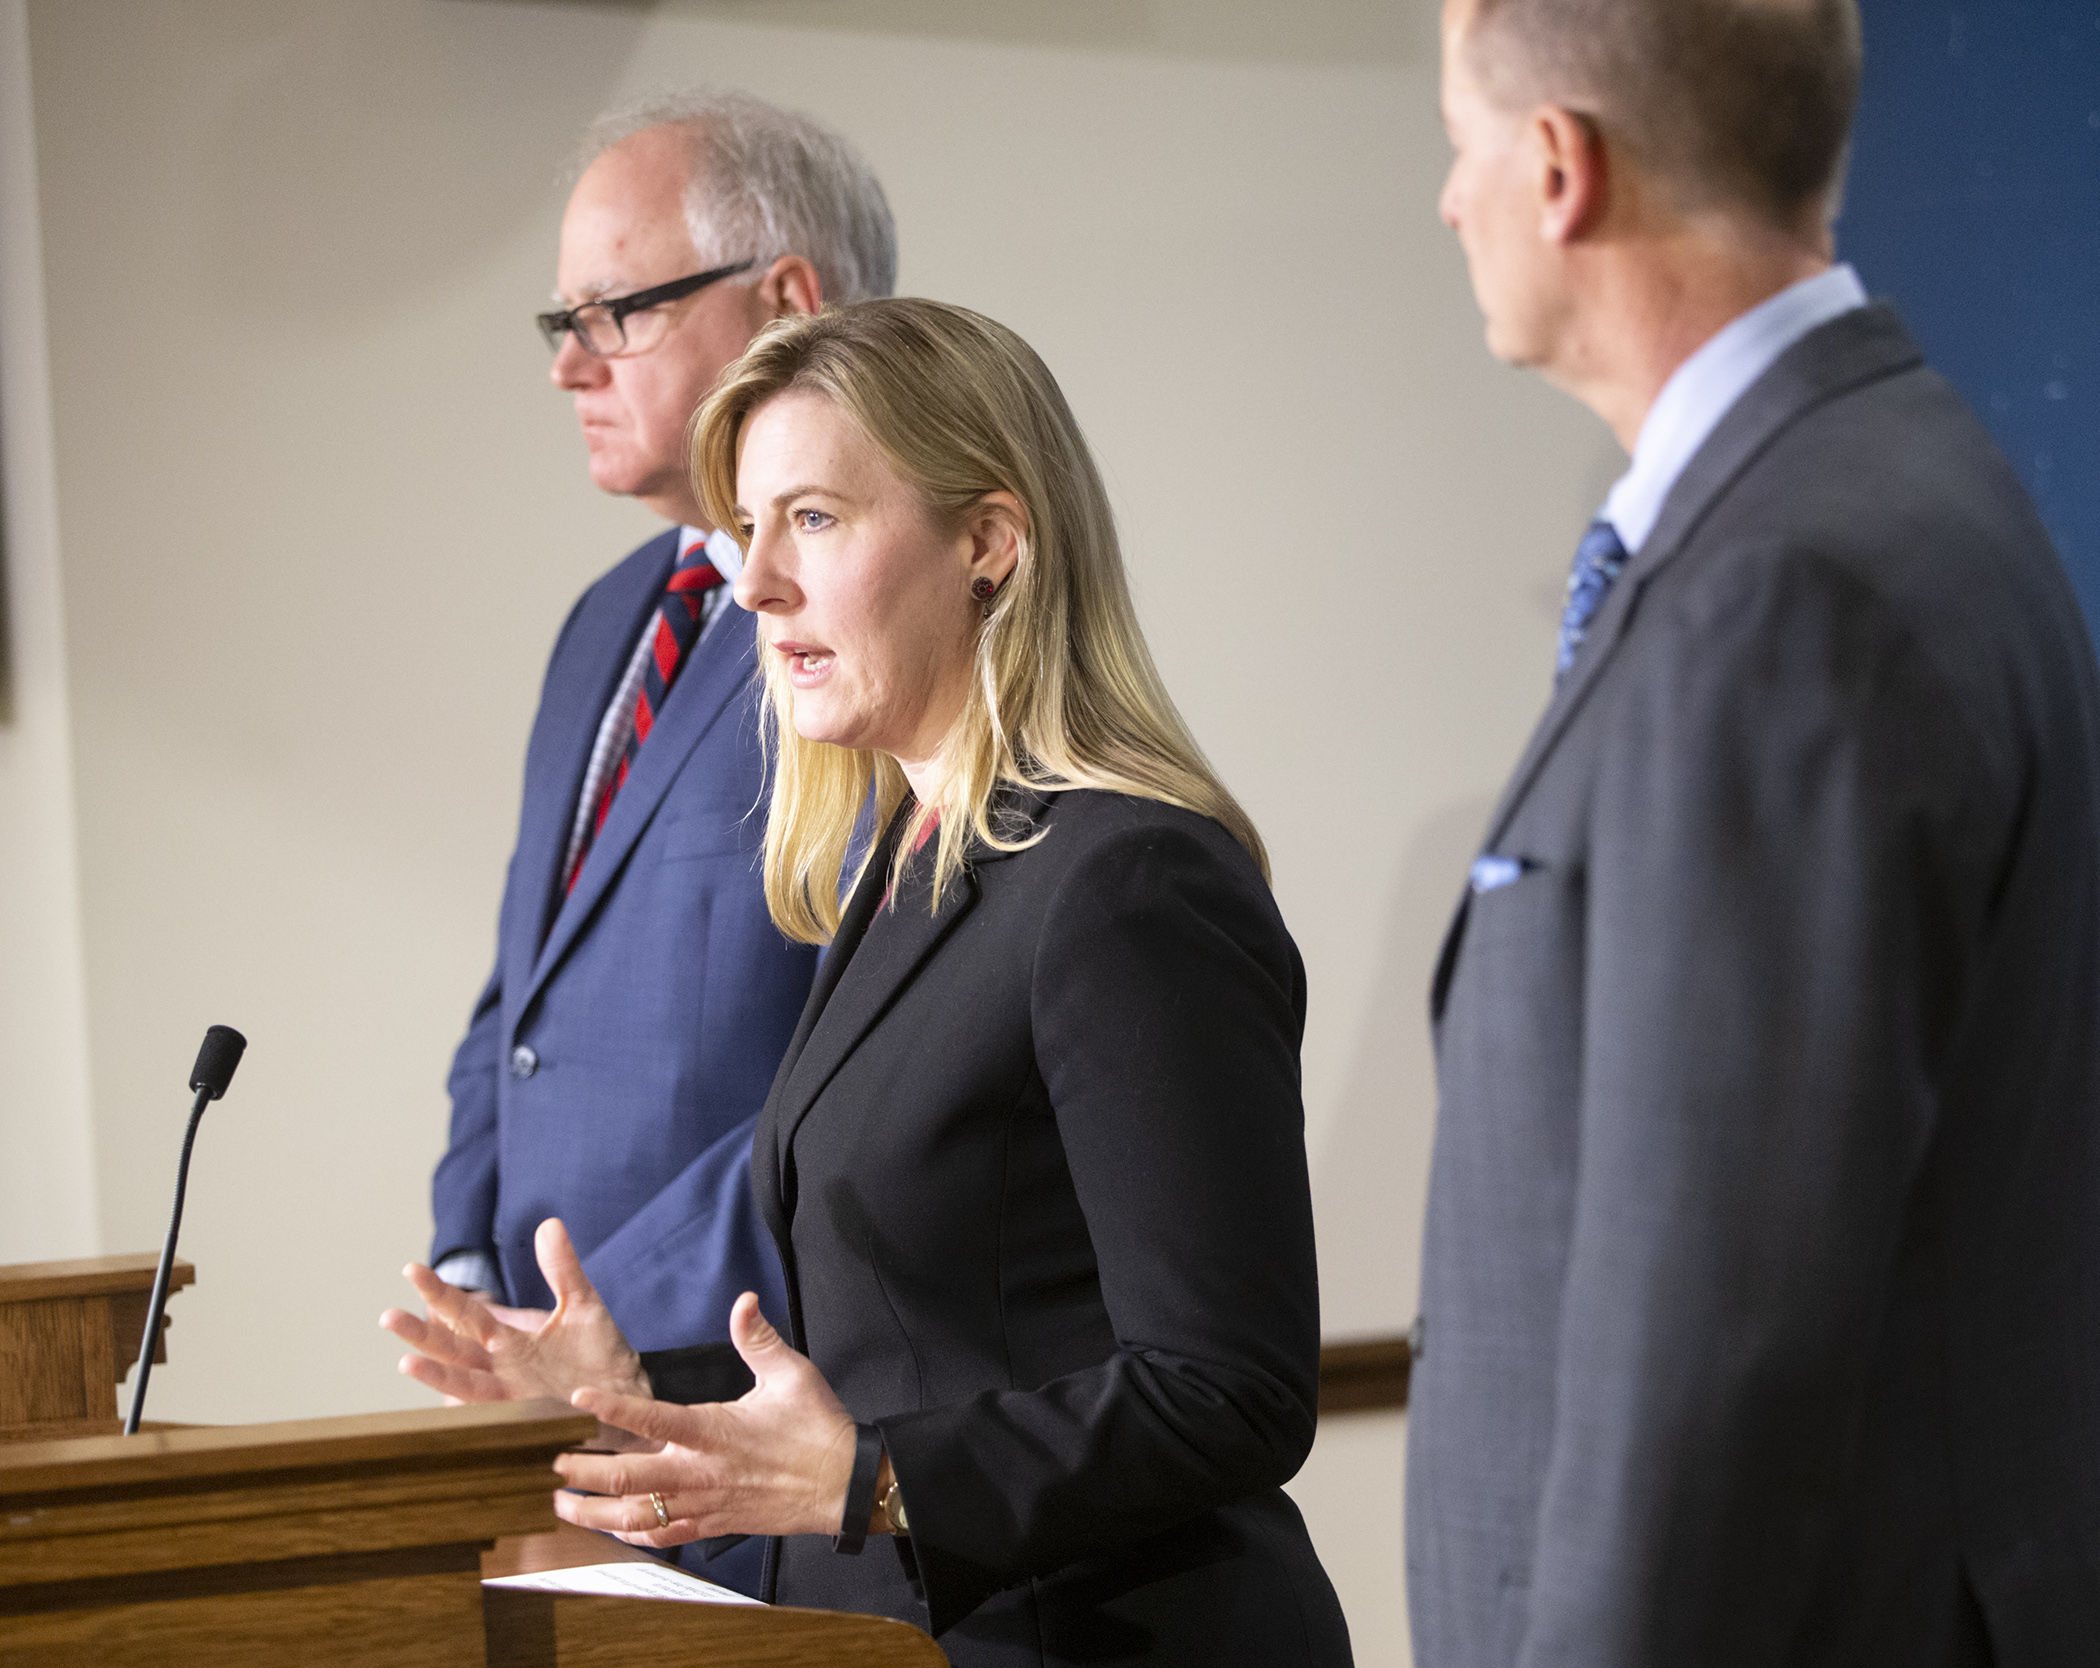 House Speaker Melissa Hortman answers a question during a news conference with Gov. Tim Walz, left, and Senate Majority Leader Paul Gazelka regarding new deadlines meant to bring the 2019 legislative session to an orderly conclusion. Photo by Paul Battaglia